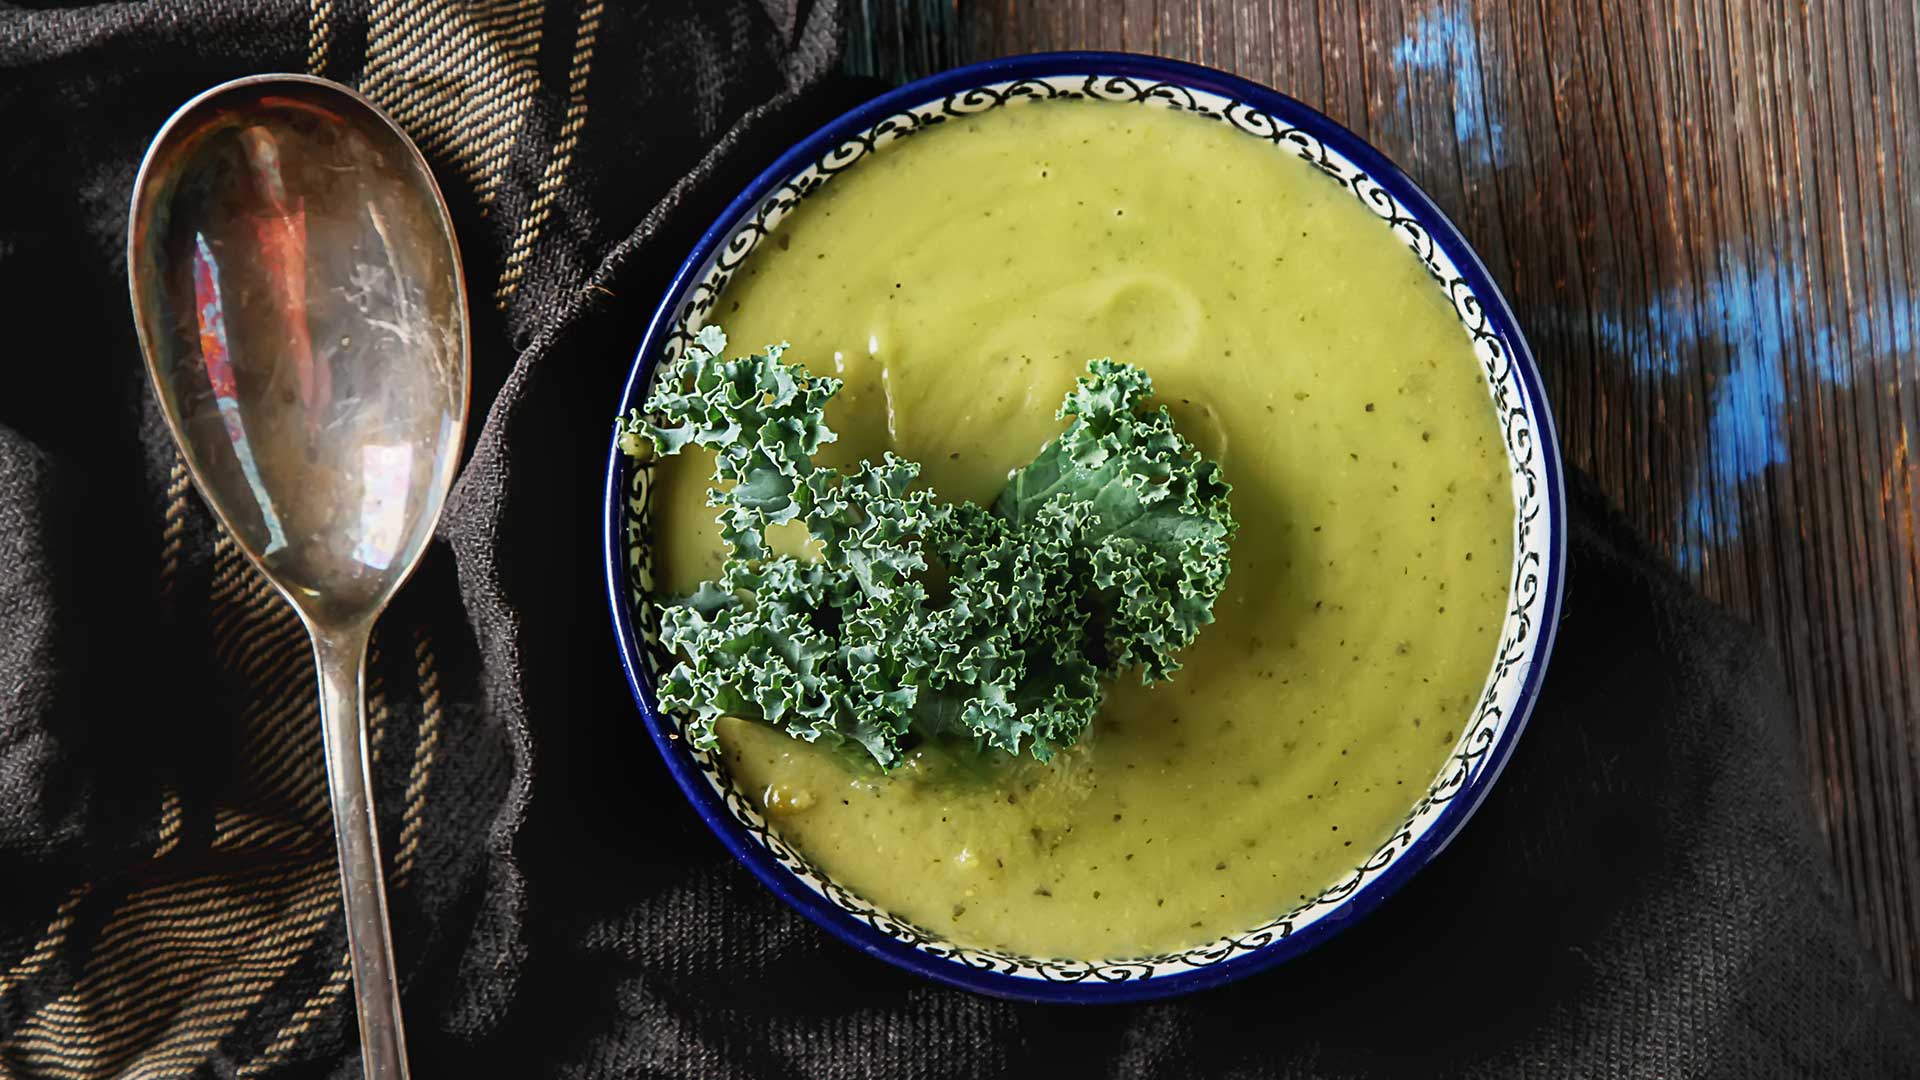 Classic pea puree soup in a blue plate with a spoon, Kale cabbage. Dark wood background